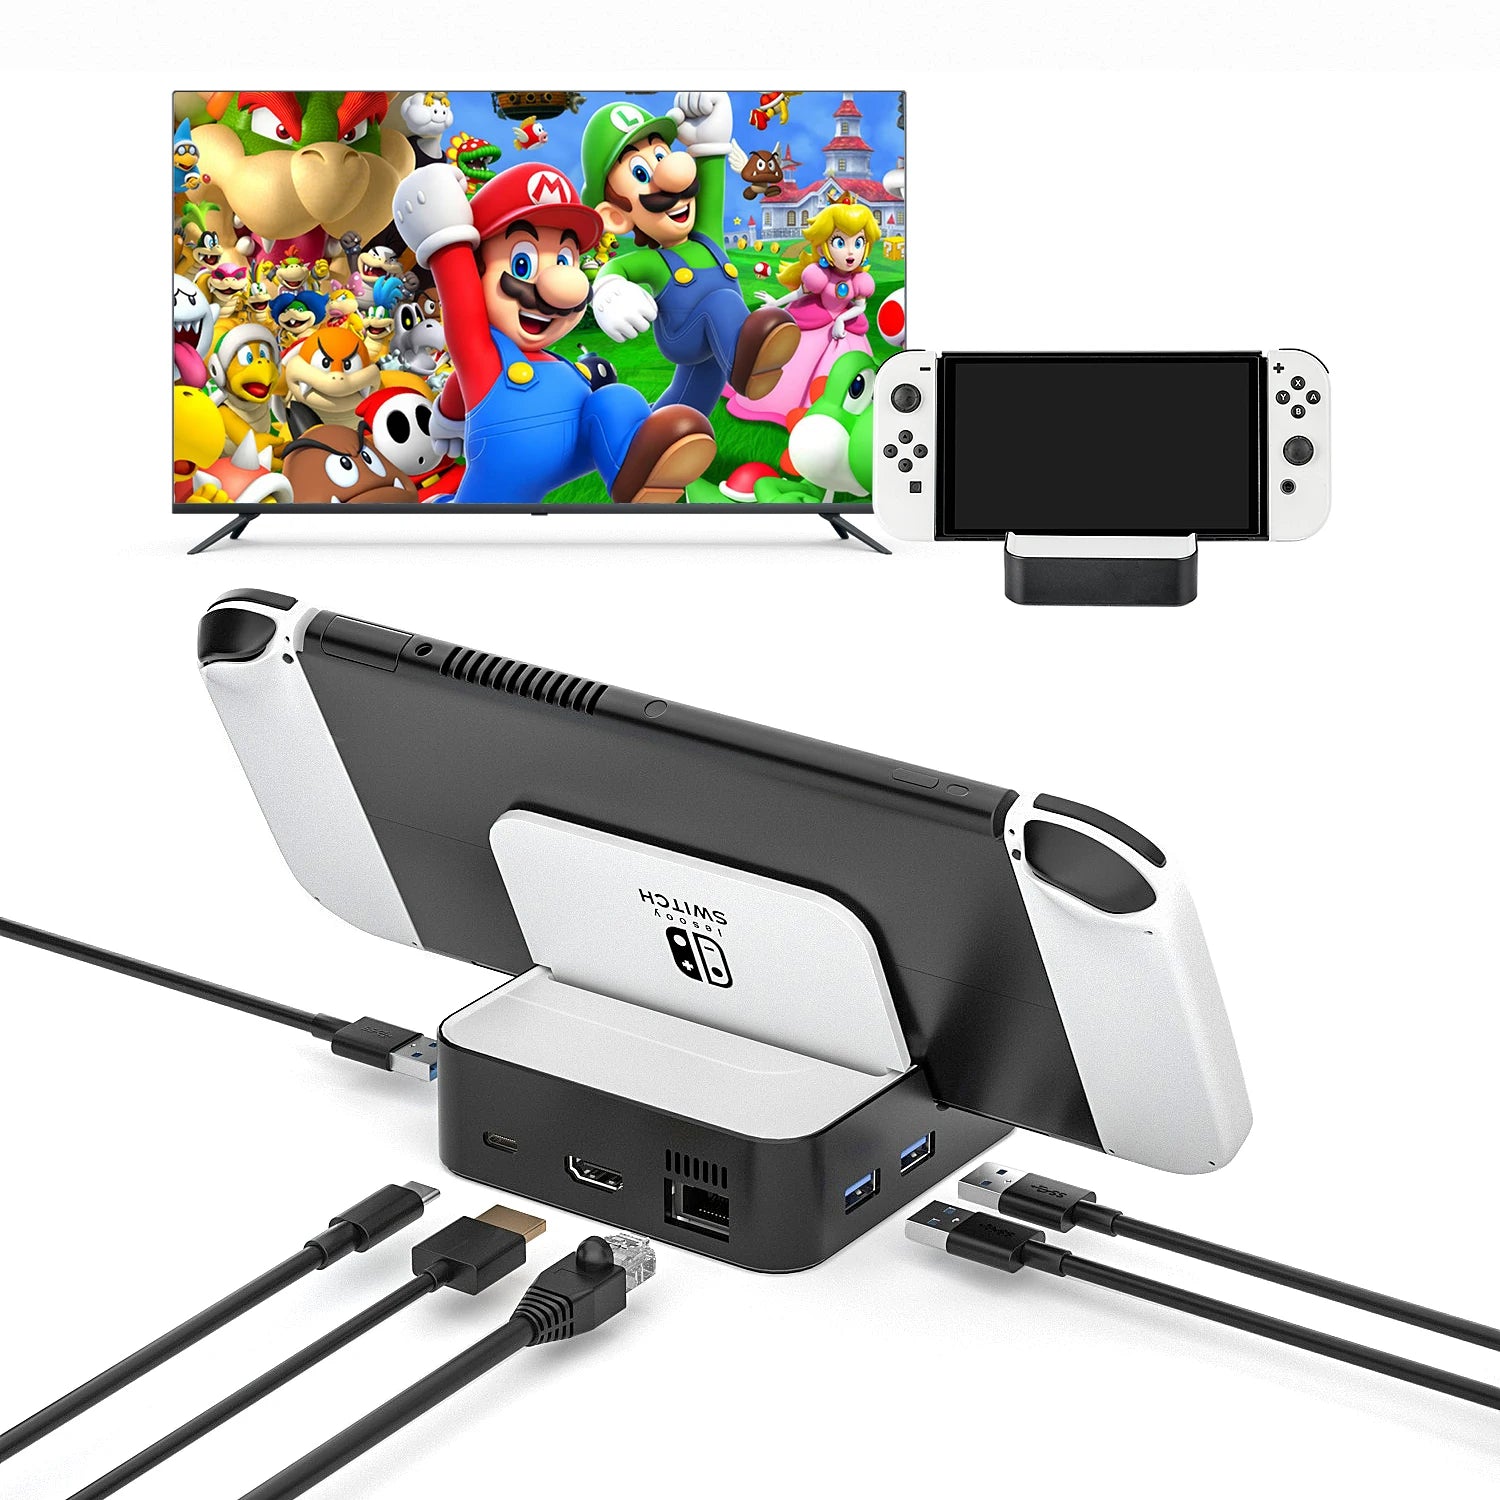 Nintendo Switch OLED TV Docking Station with Charging Adapter